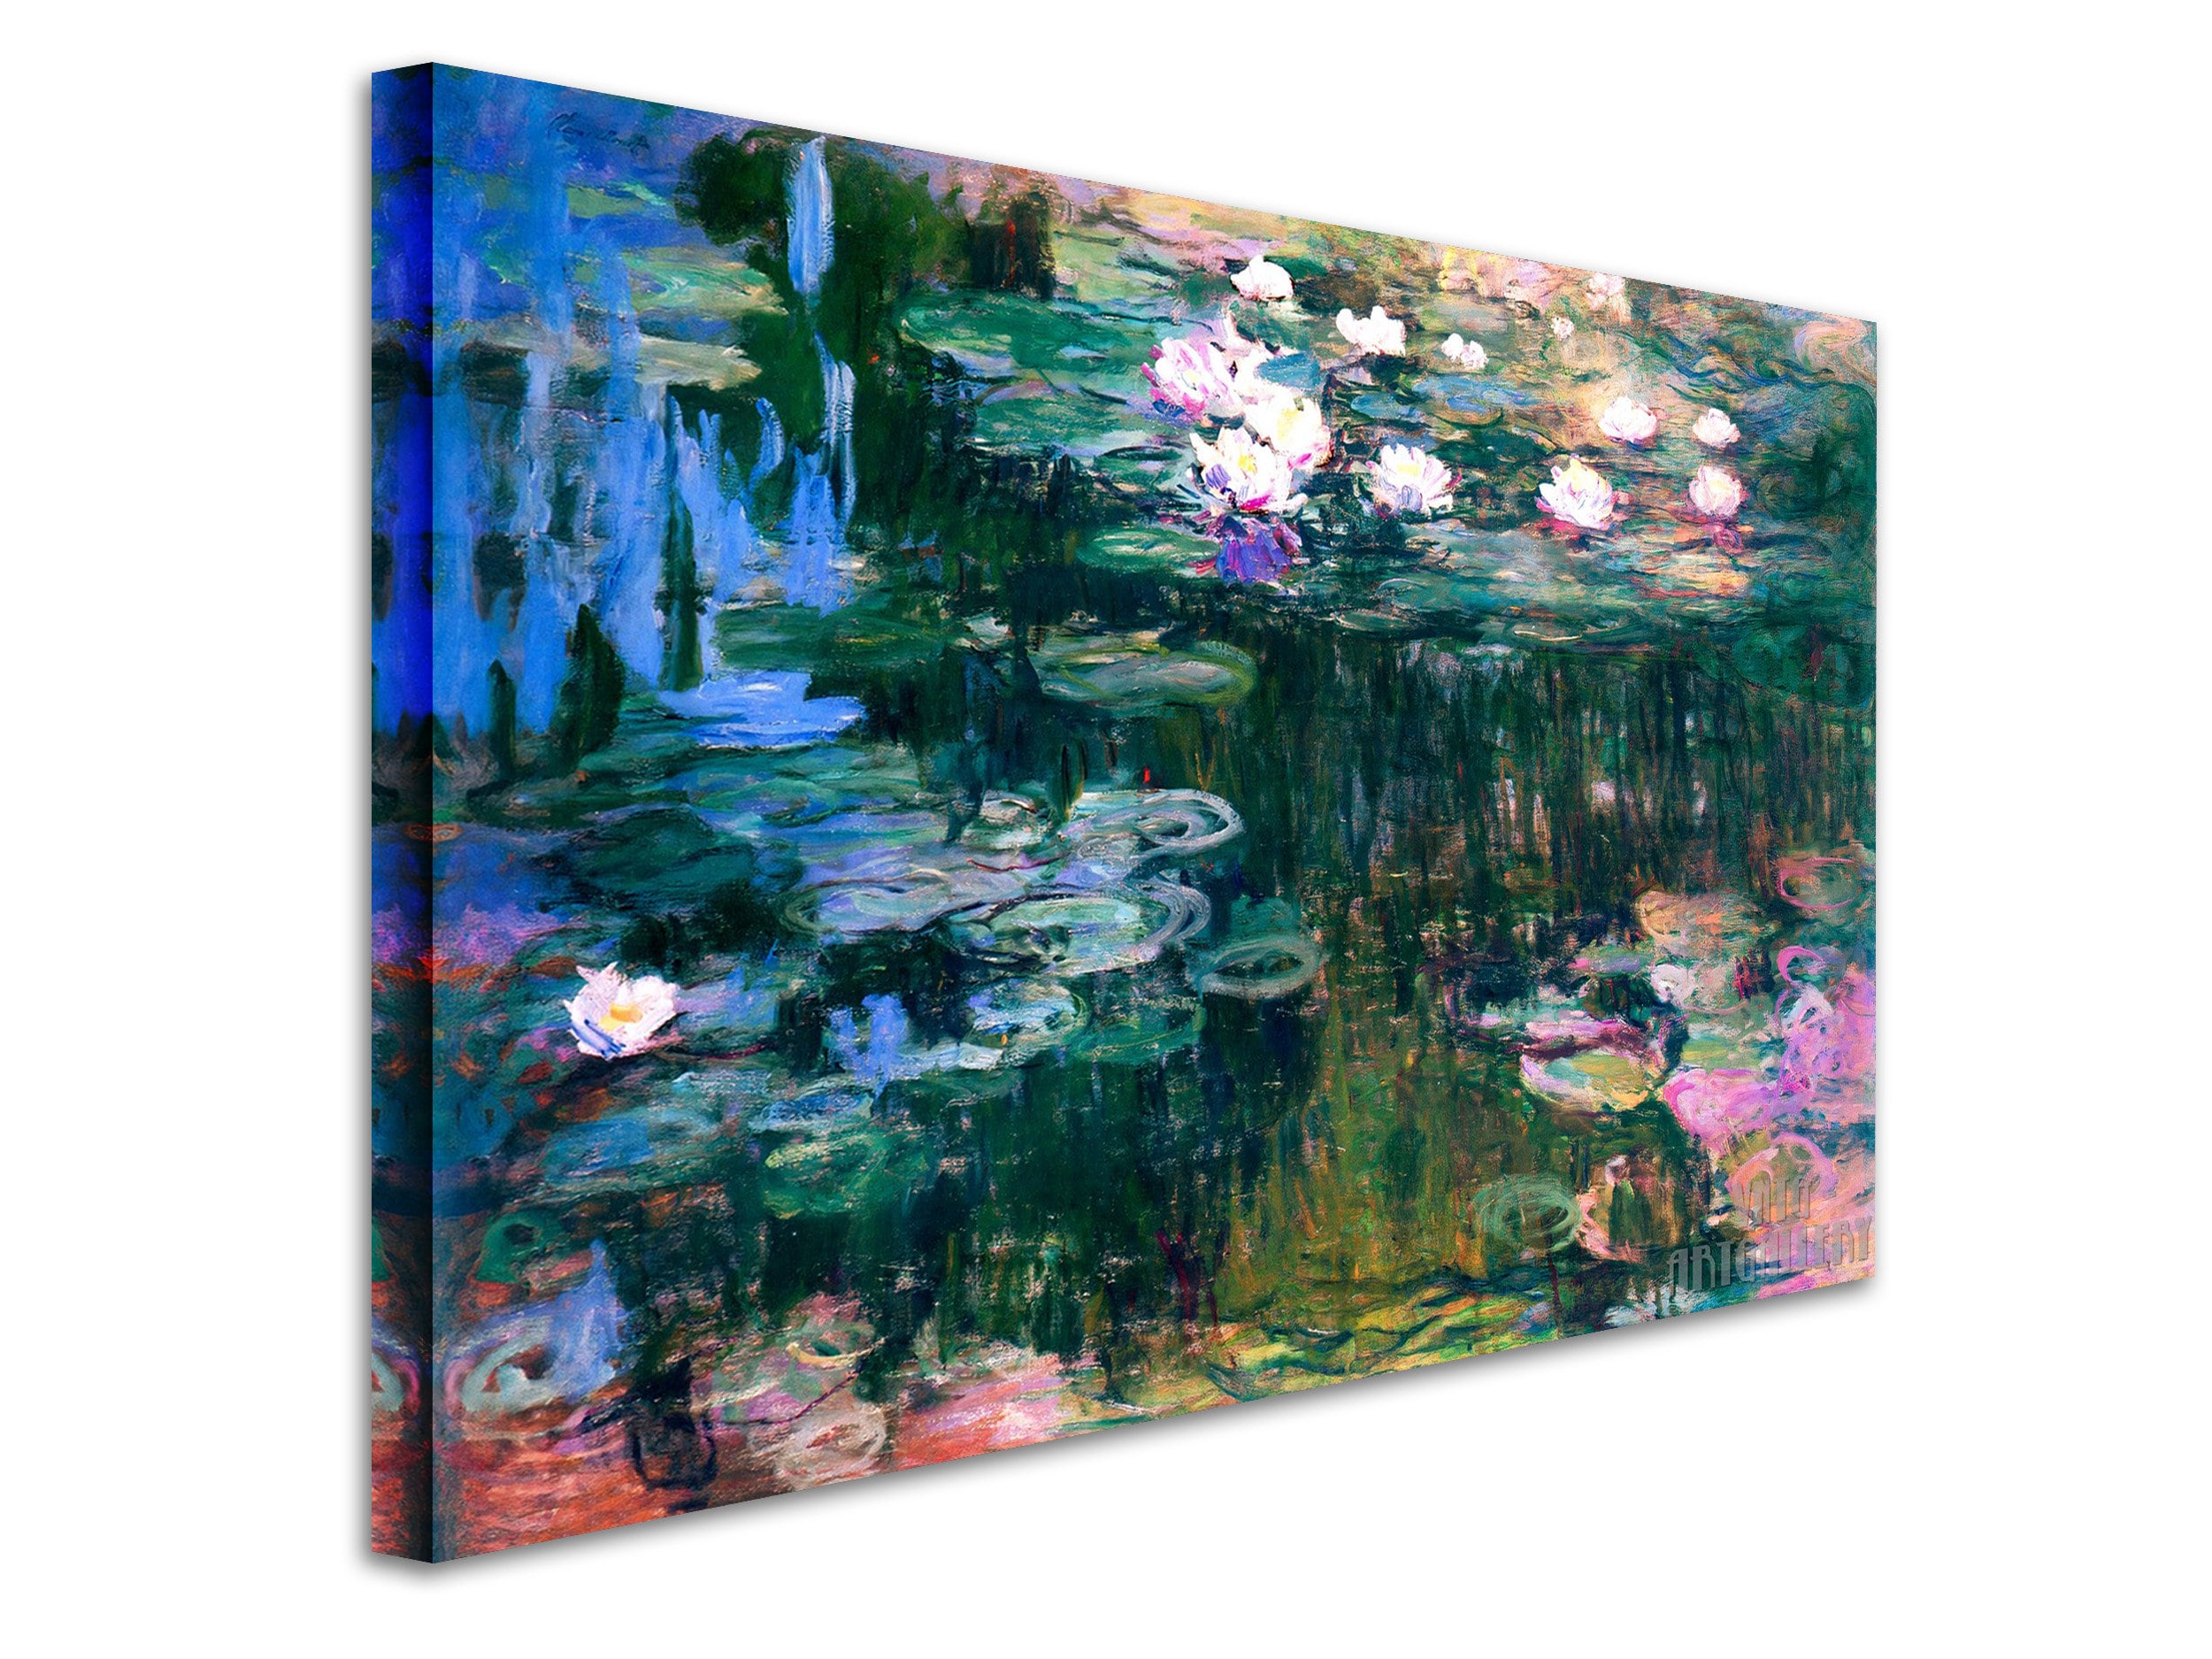 Claude Monet : Water Lilies 1917 Canvas Gallery Wrapped or Framed